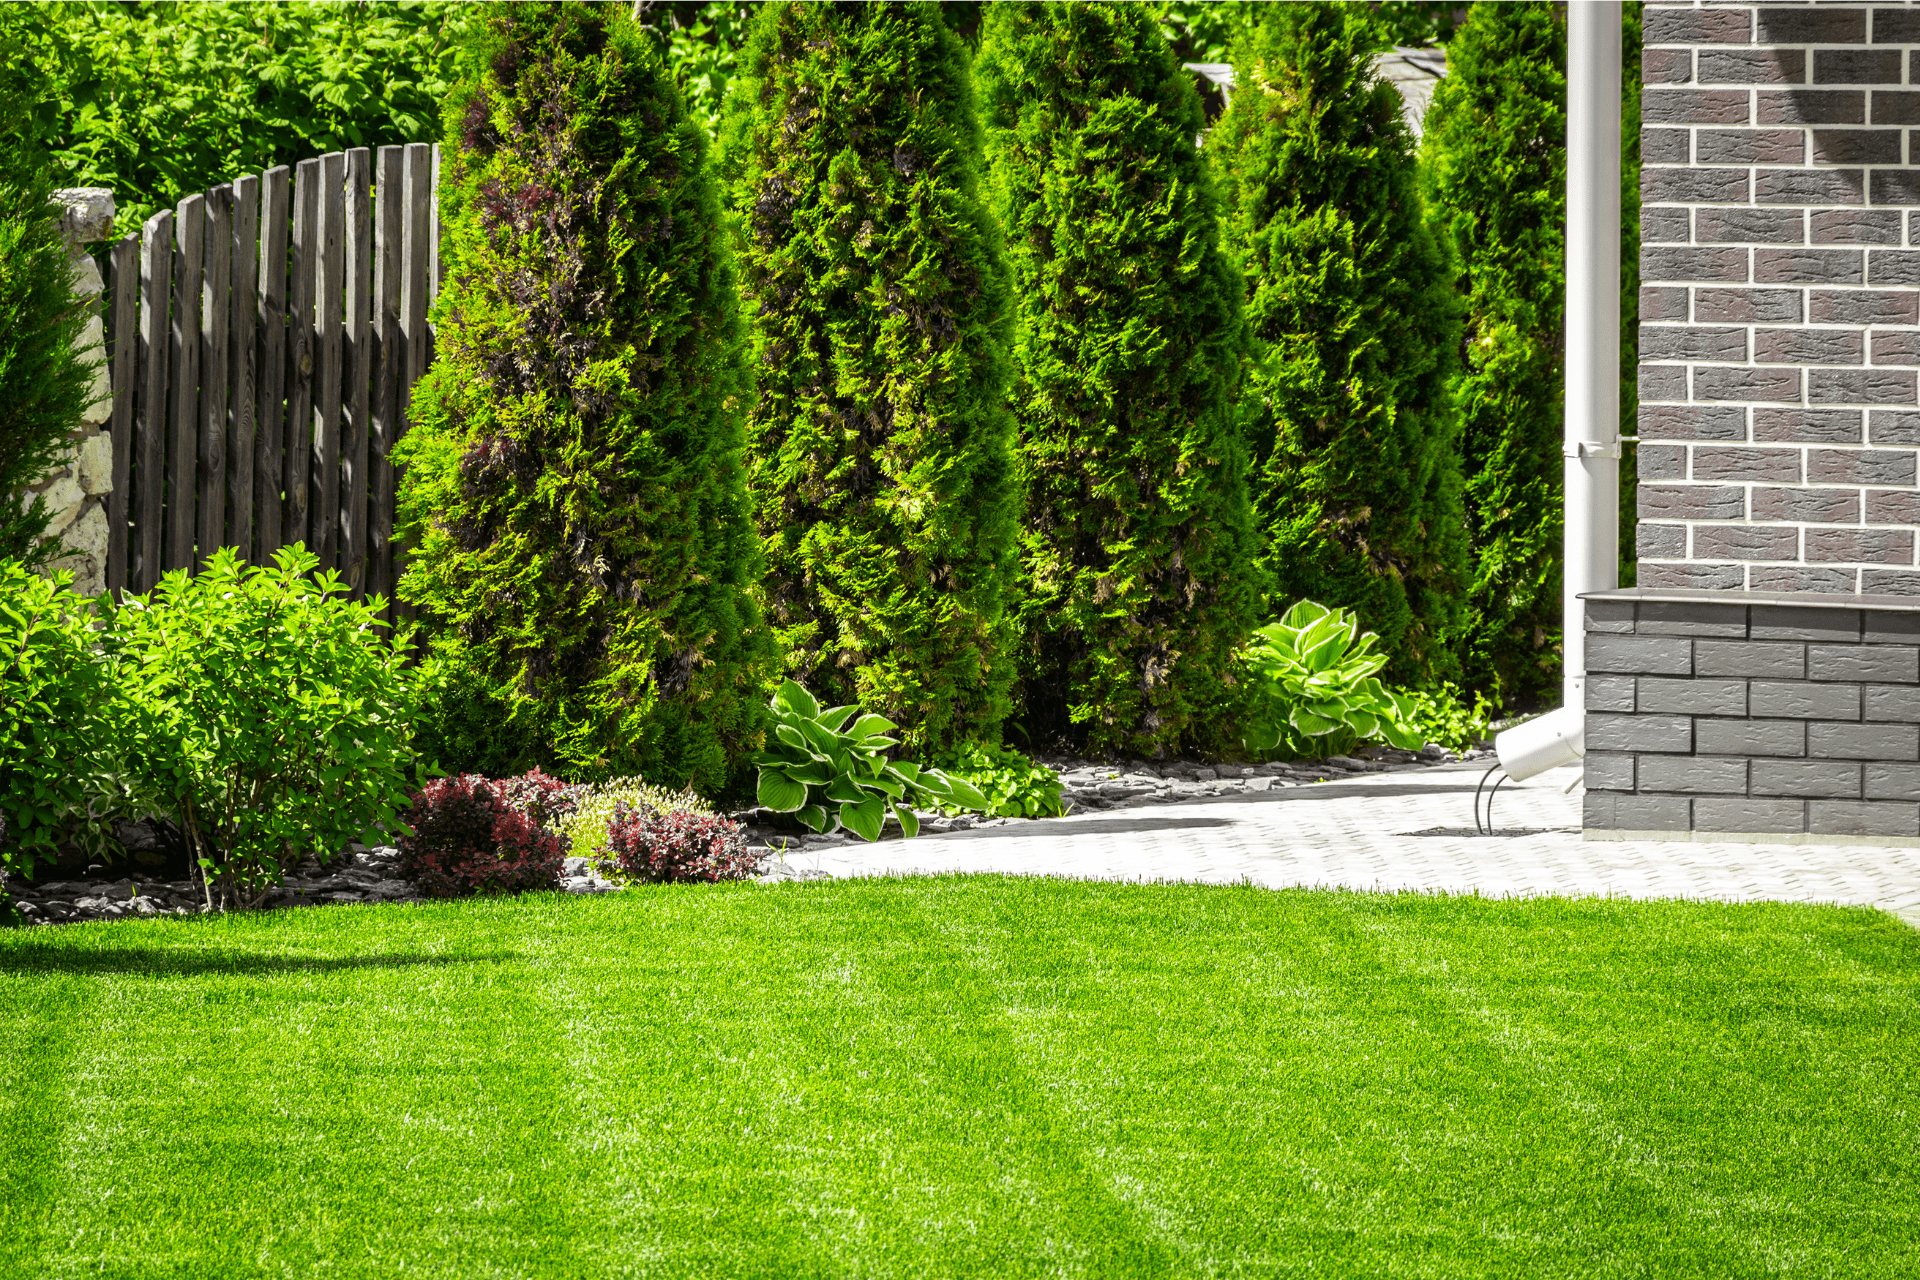 Green, lush, lawn well-maintained by Boise Landscaping Company's lawn maintenance services